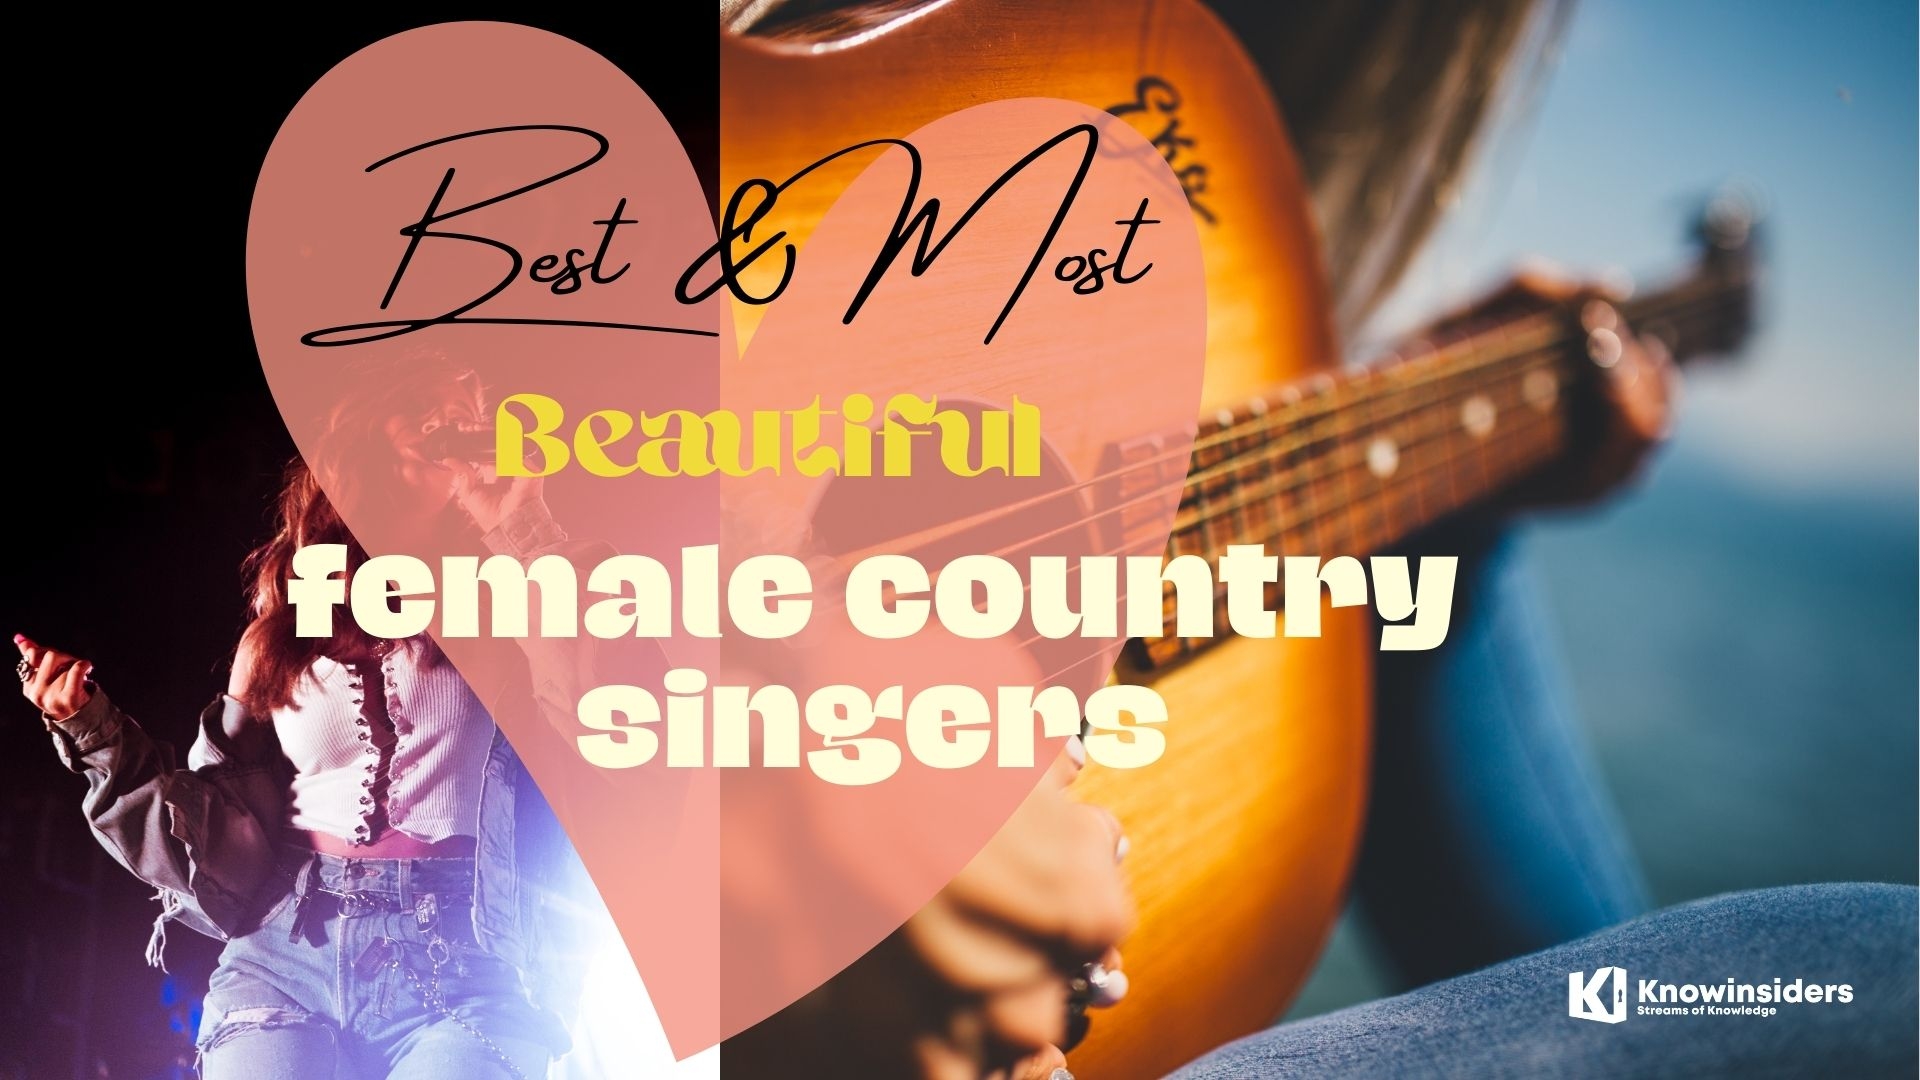 Top 10 Best and Most Beautiful Female Country Singers